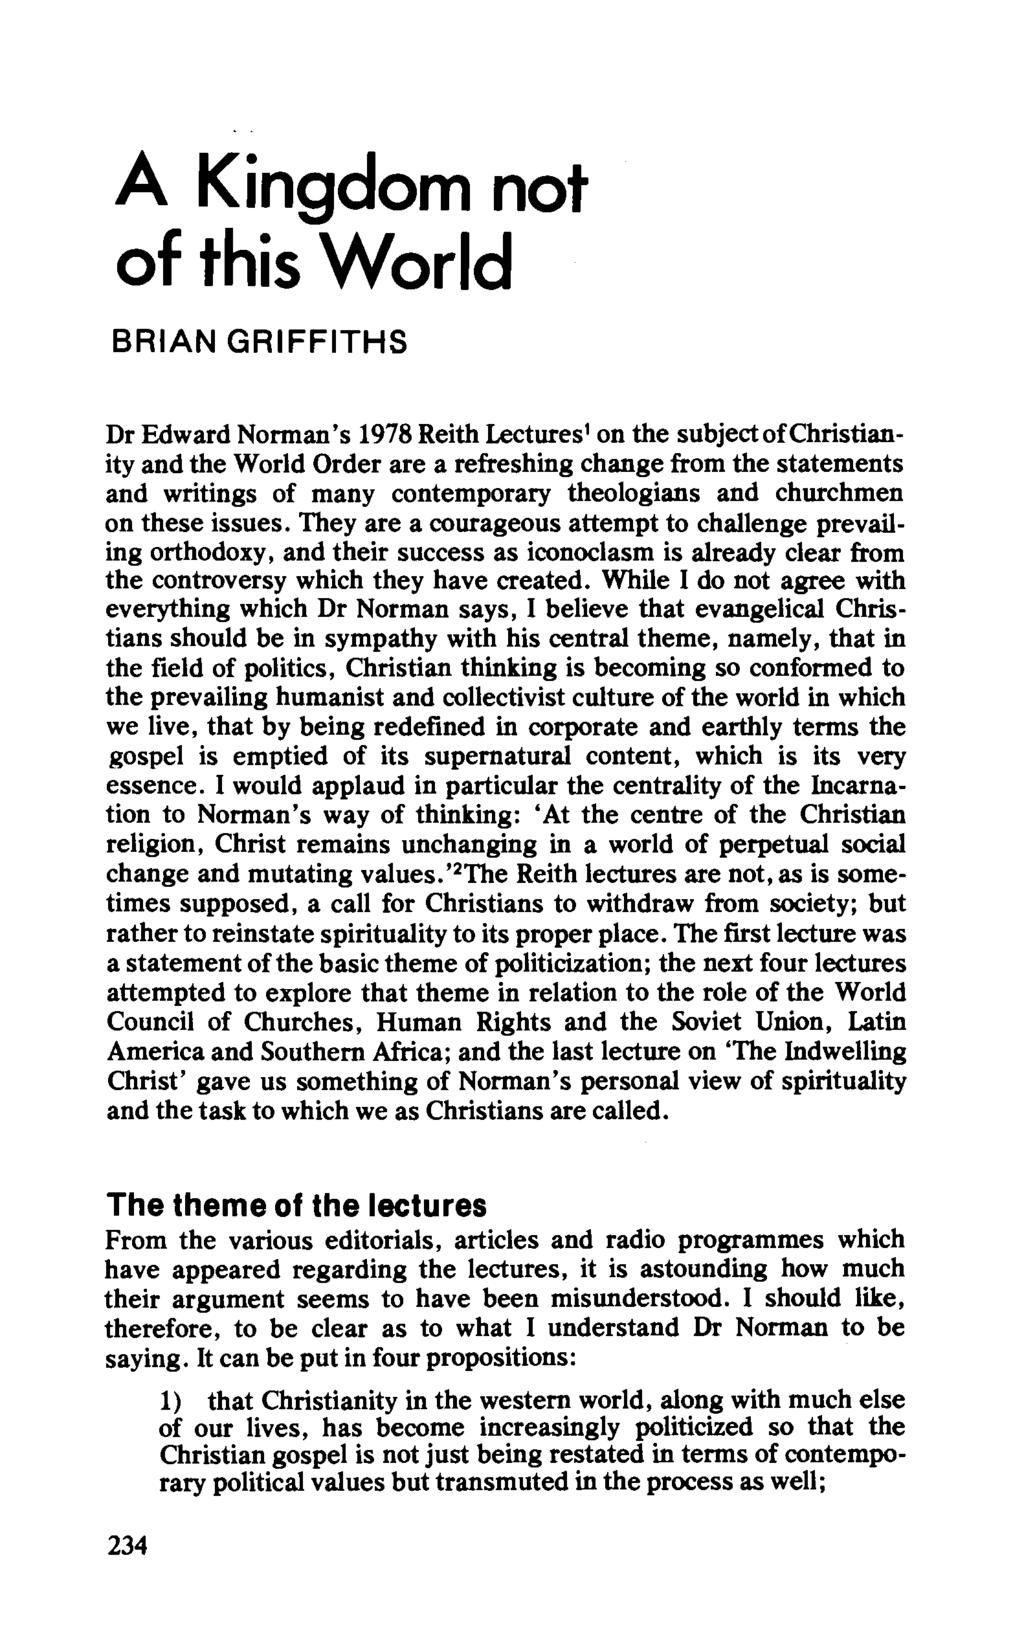 A Kingdom not of this World BRIAN GRIFFITHS Dr Edward Norman's 1978 Reith Lectures 1 on the subjectofchristianity and the World Order are a refreshing change from the statements and writings of many